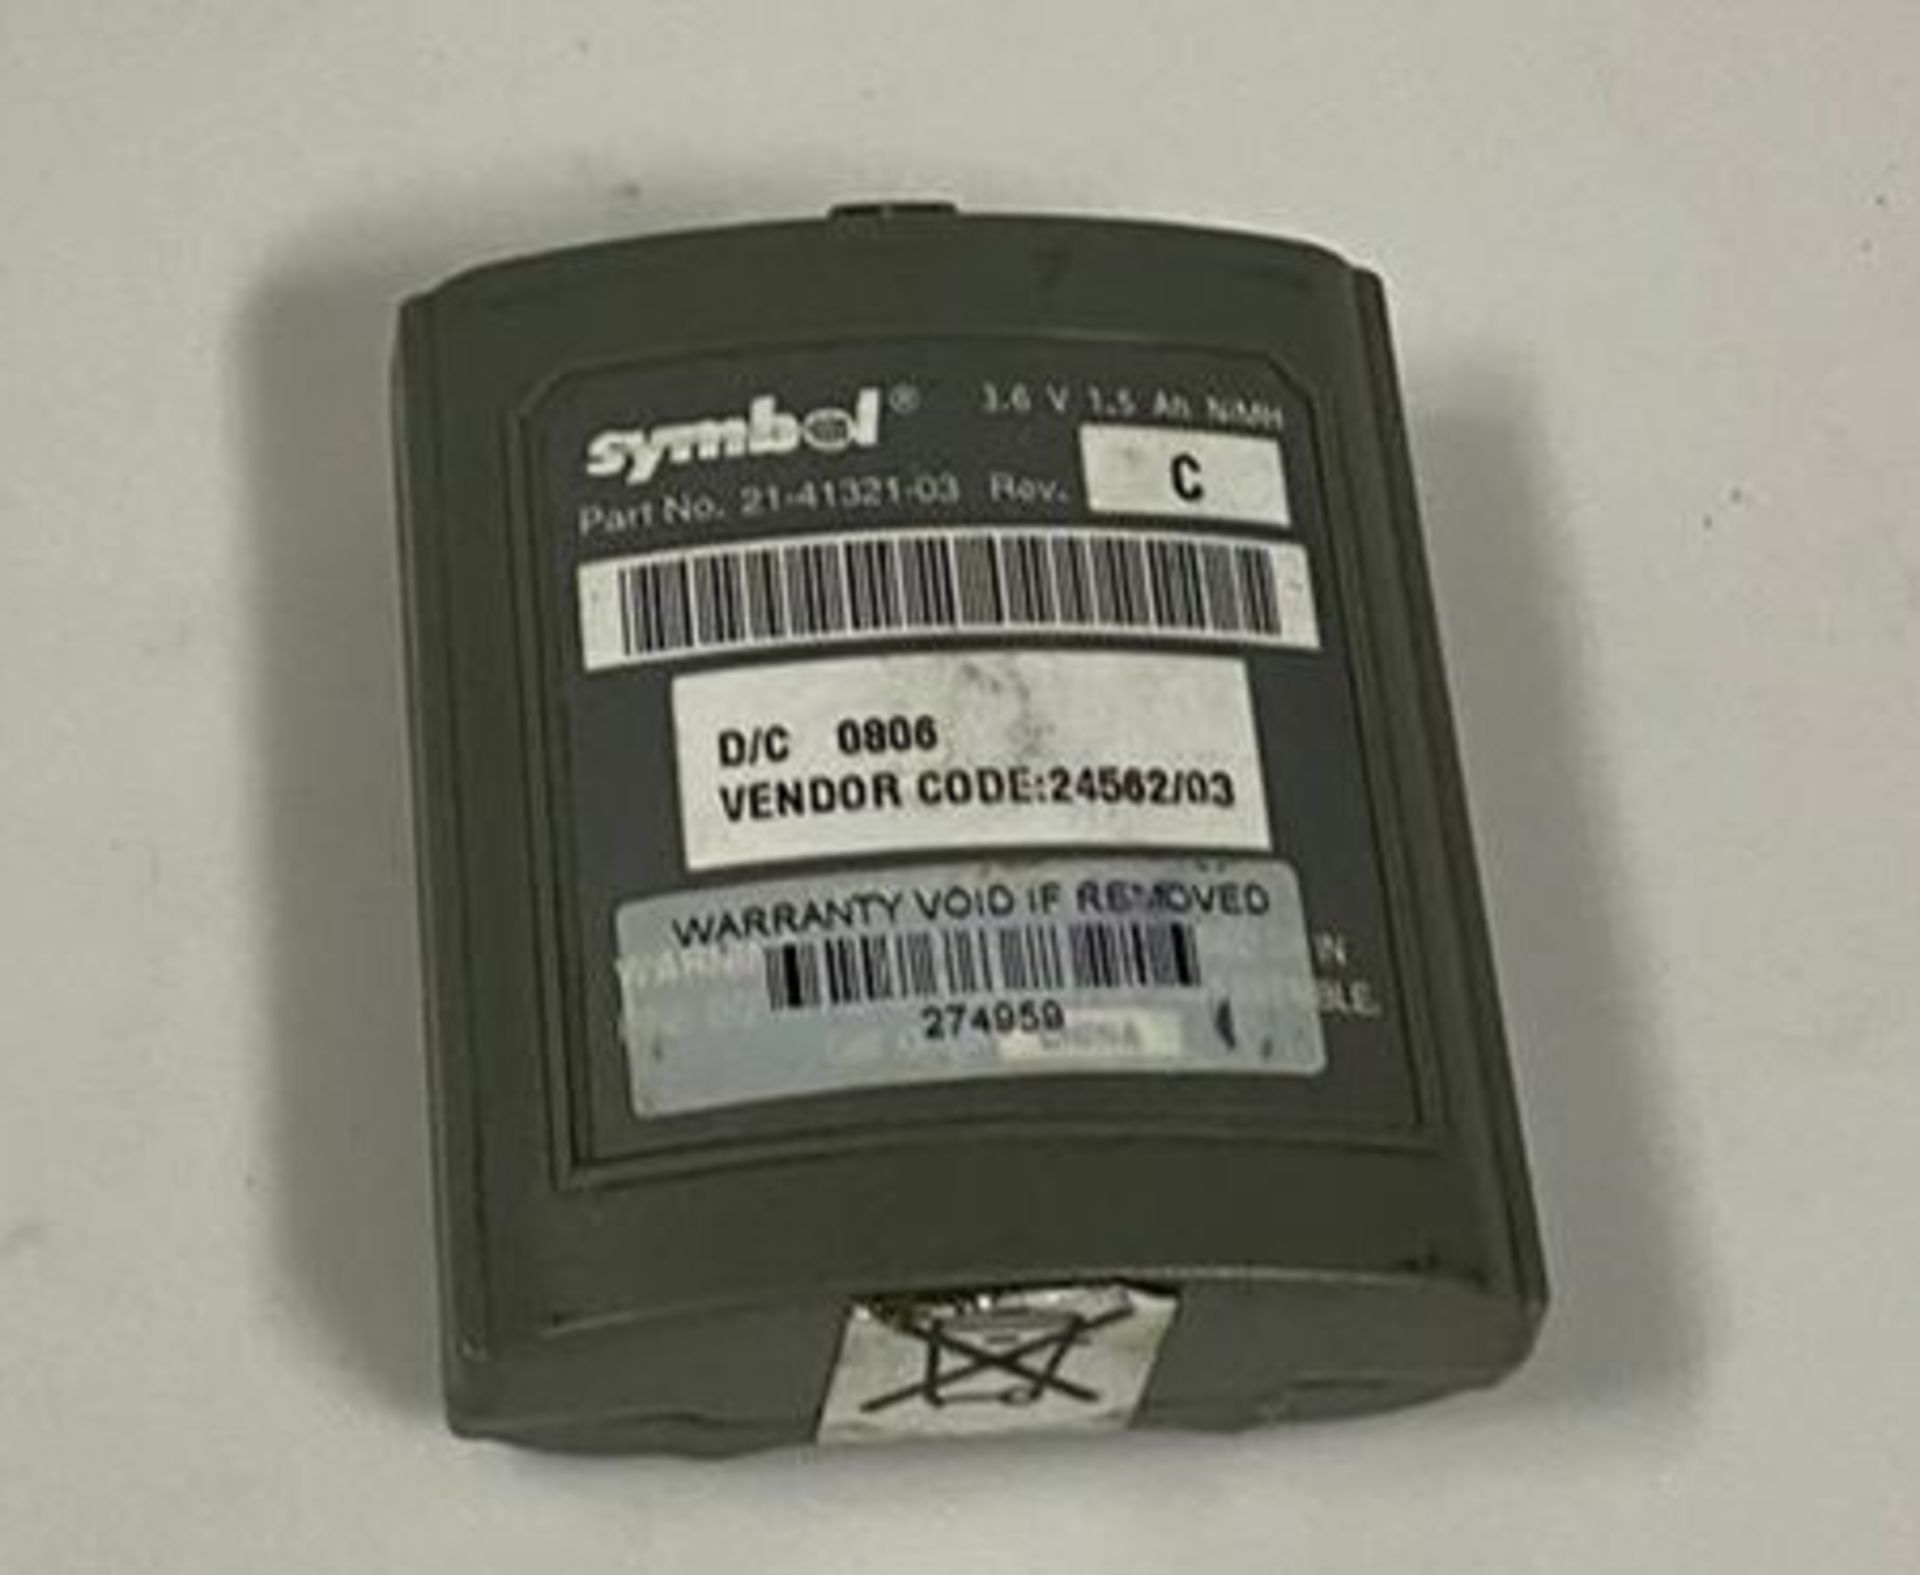 35 x Symbol Barcode Scanner Batteries - Type 21-4321-03 - CL011 - OSU 2 D1 (MS174) - Location: - Image 2 of 4